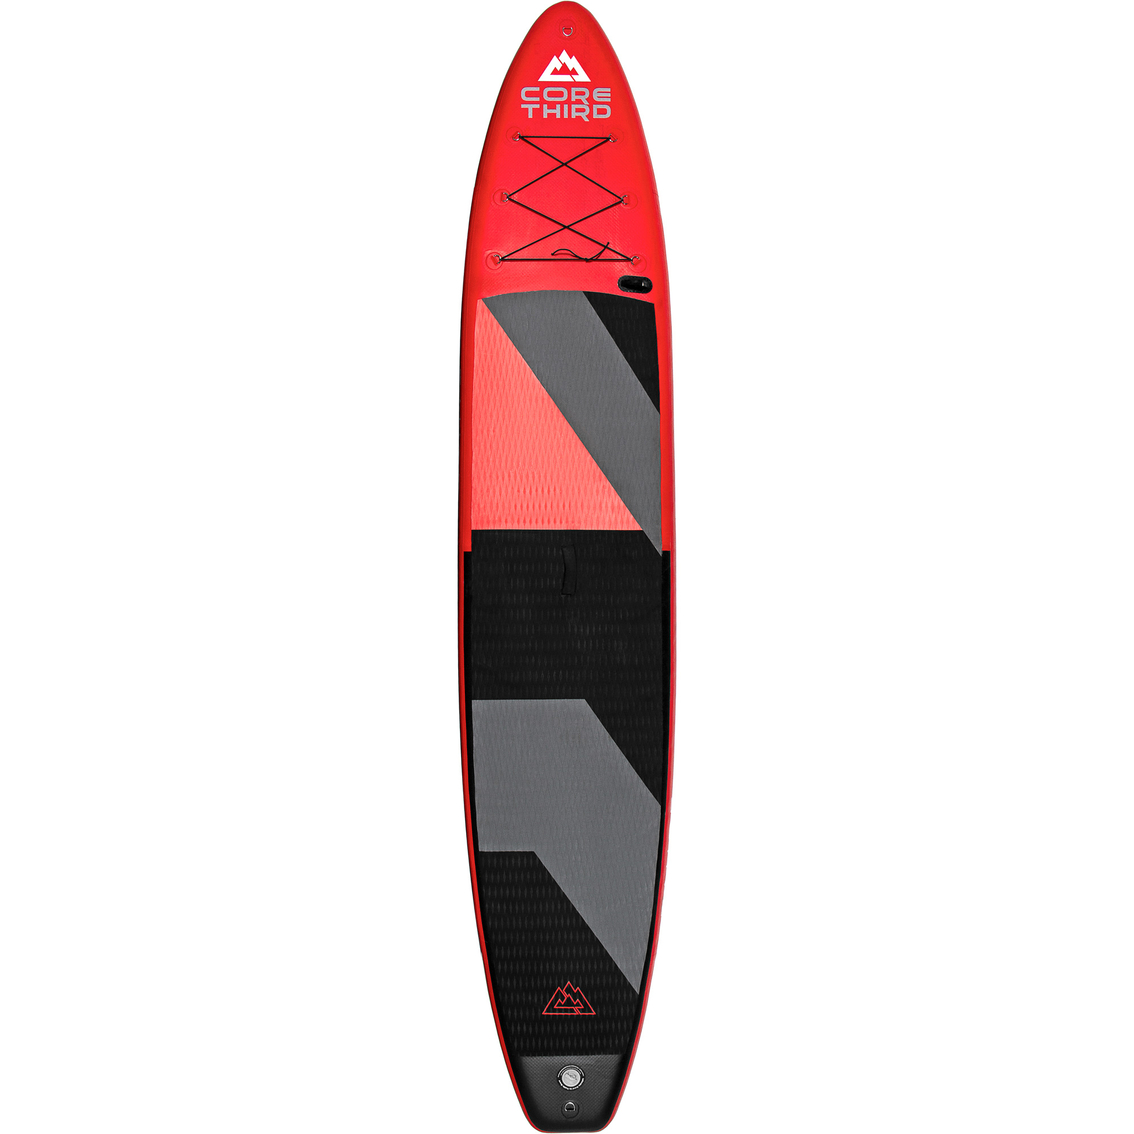 Core Third Tahoe Inflatable Paddle Board - Image 3 of 8